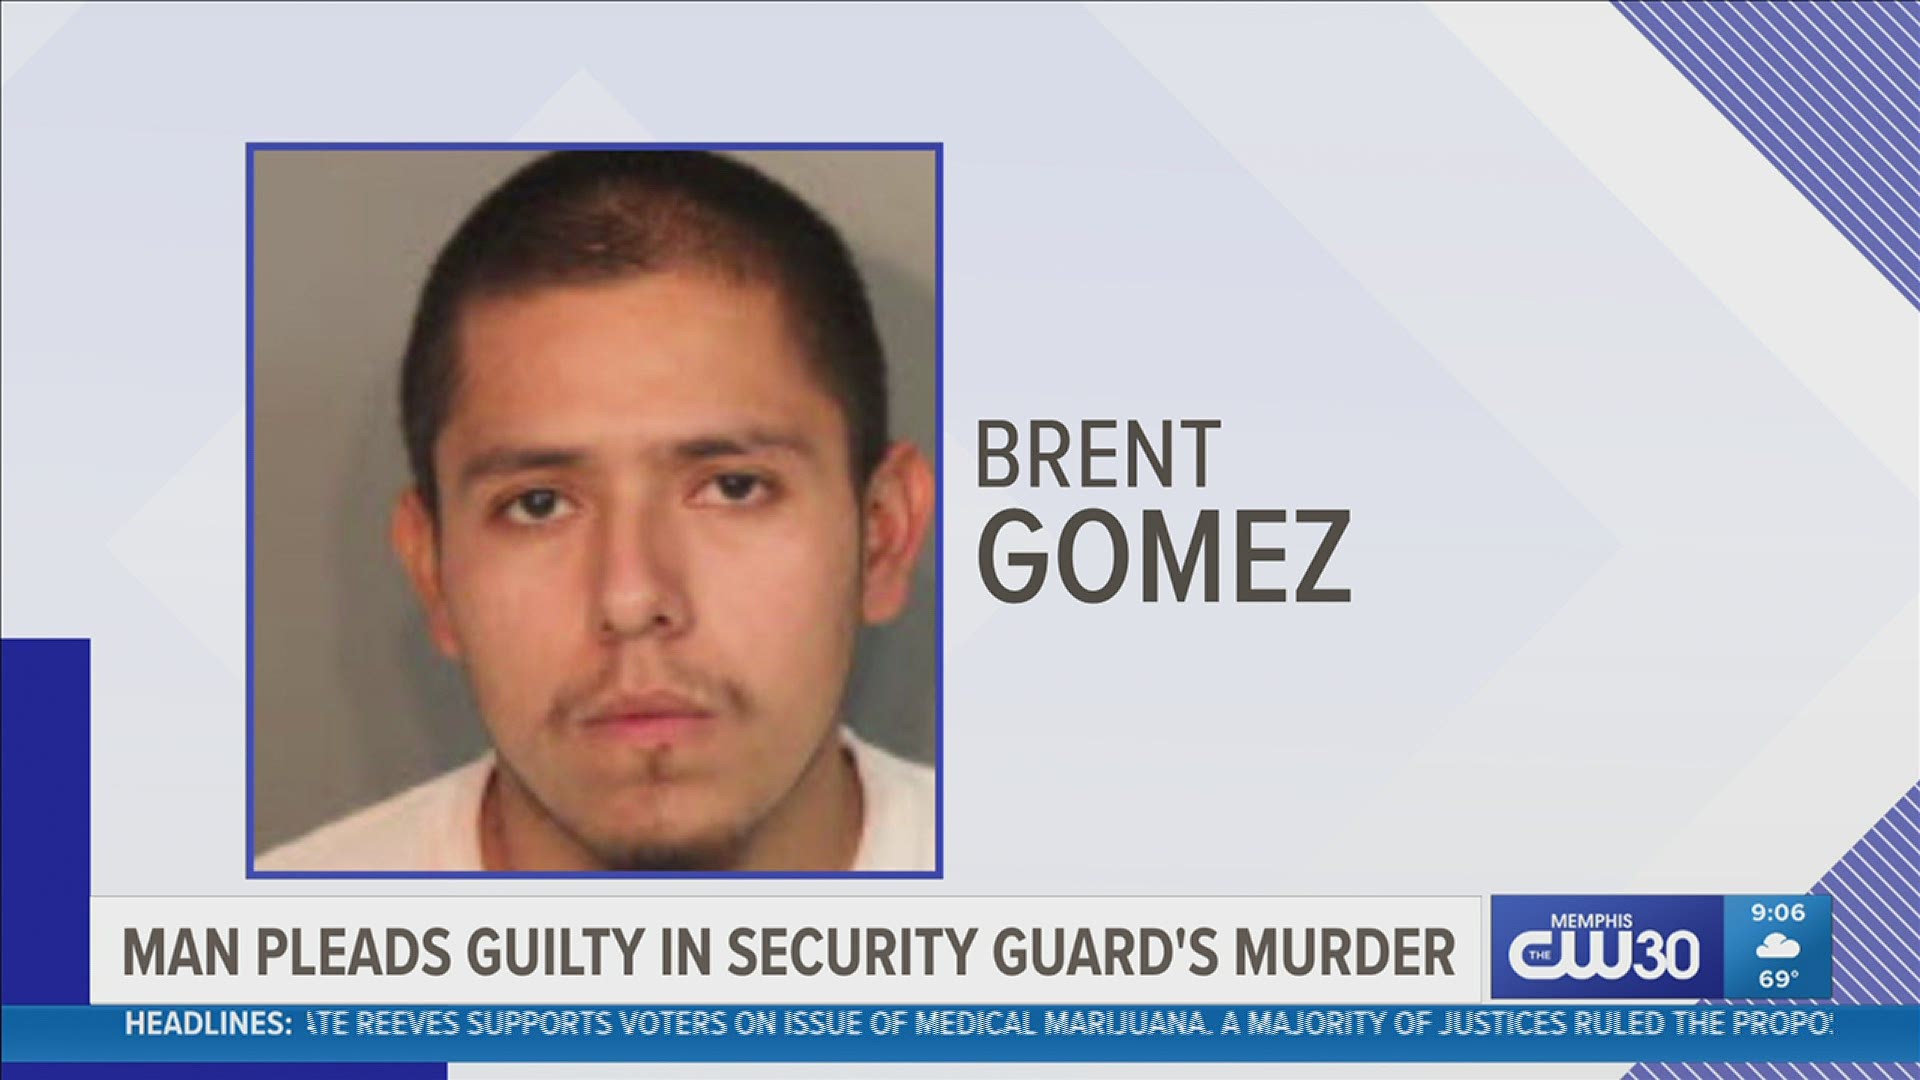 Brent Gomez pled guilty to second-degree murder in the death of Jose Alberto Vilchis Villareal and was sentenced to 30 years in prison.